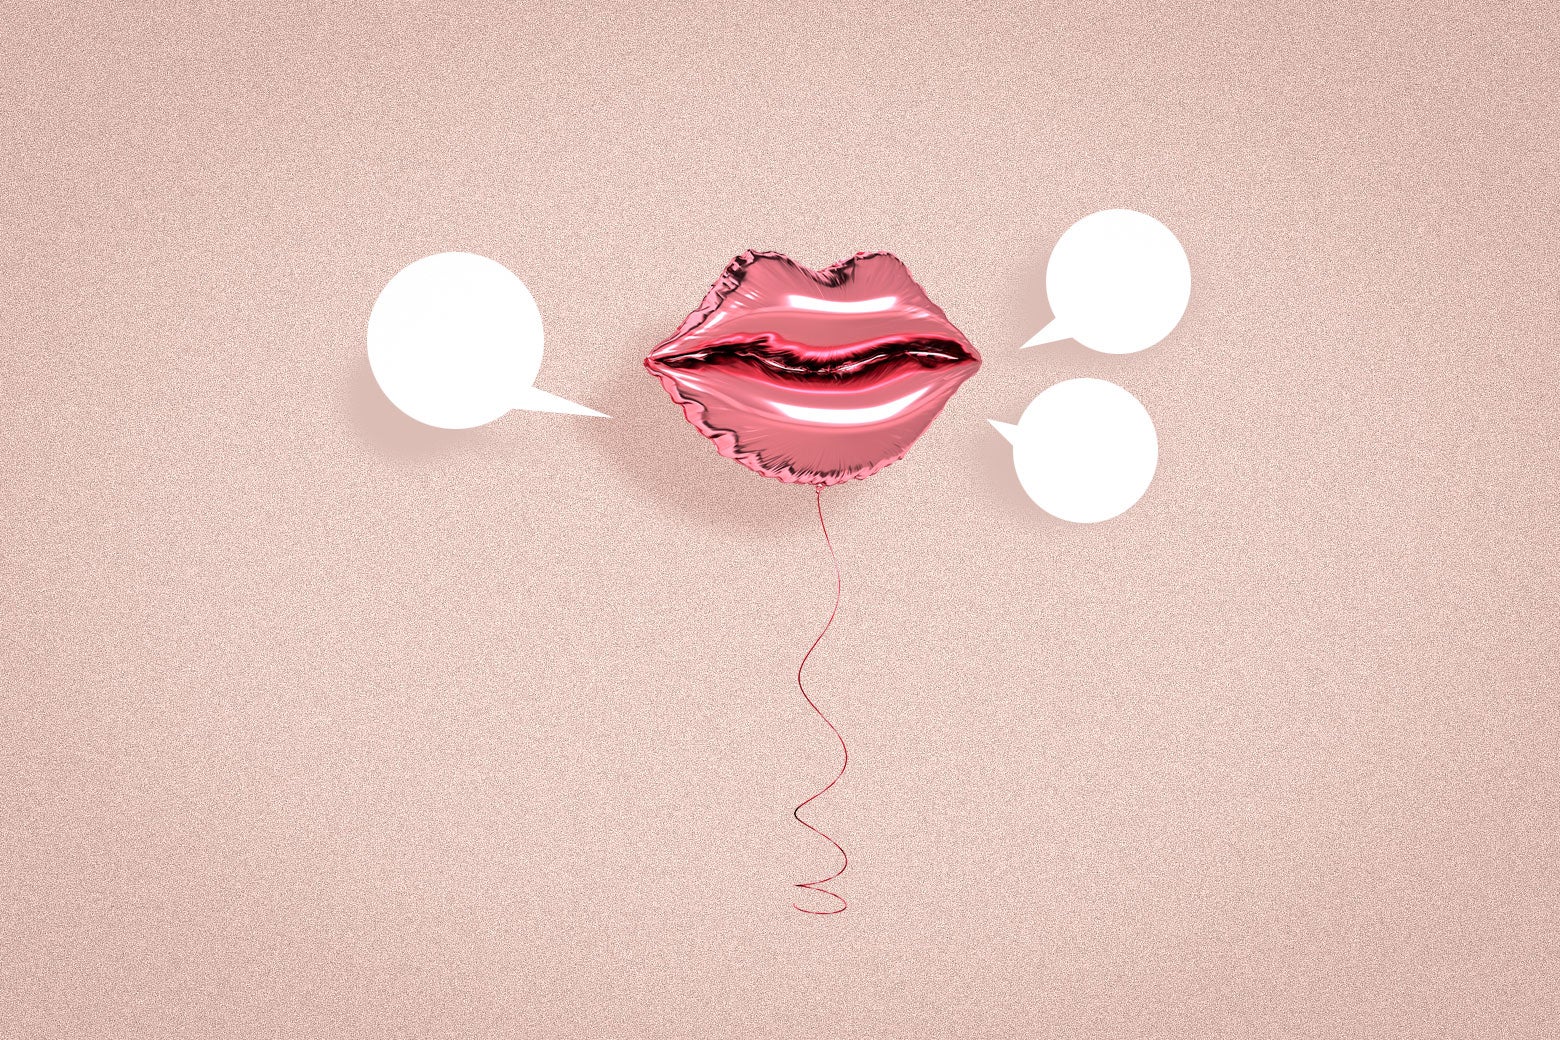 A balloon set of lips, with several speech bubbles around it.